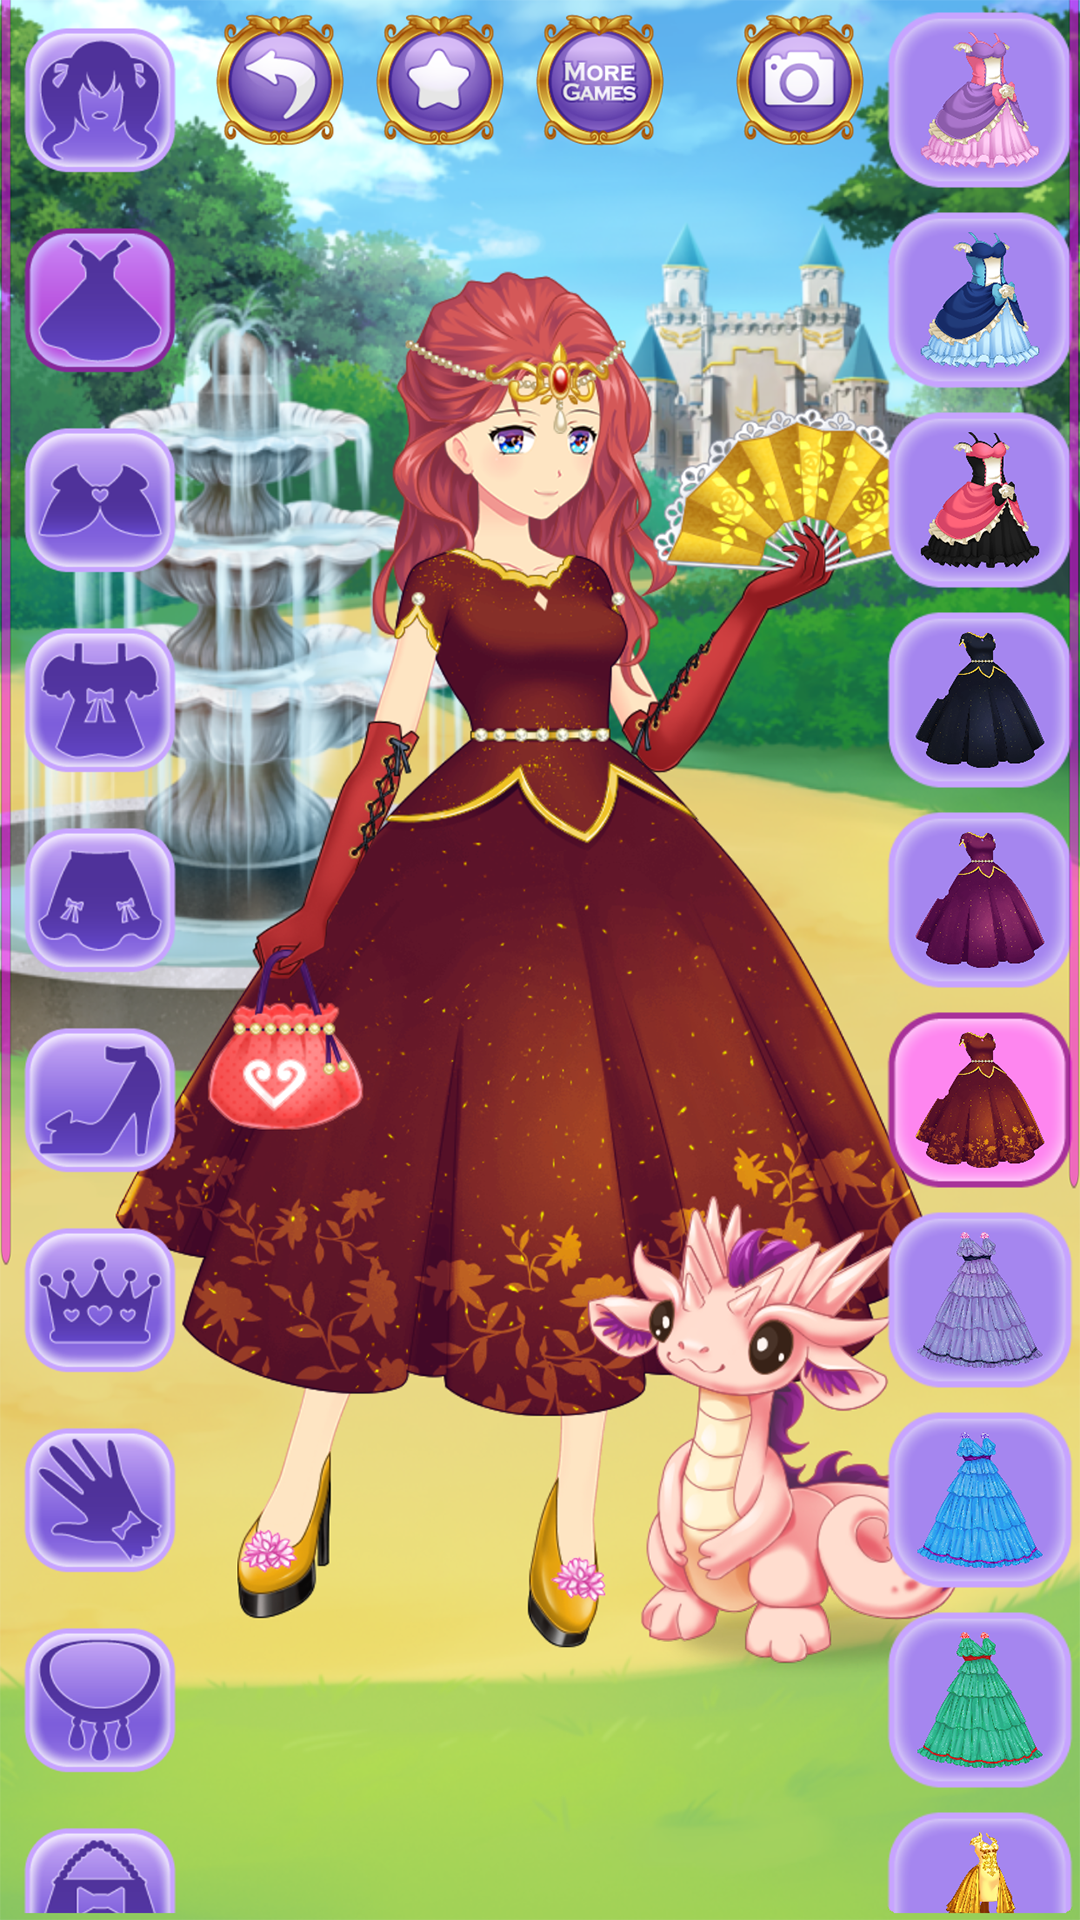 Dreamer's Avocade - Anime Dress up Games by willbeyou on DeviantArt